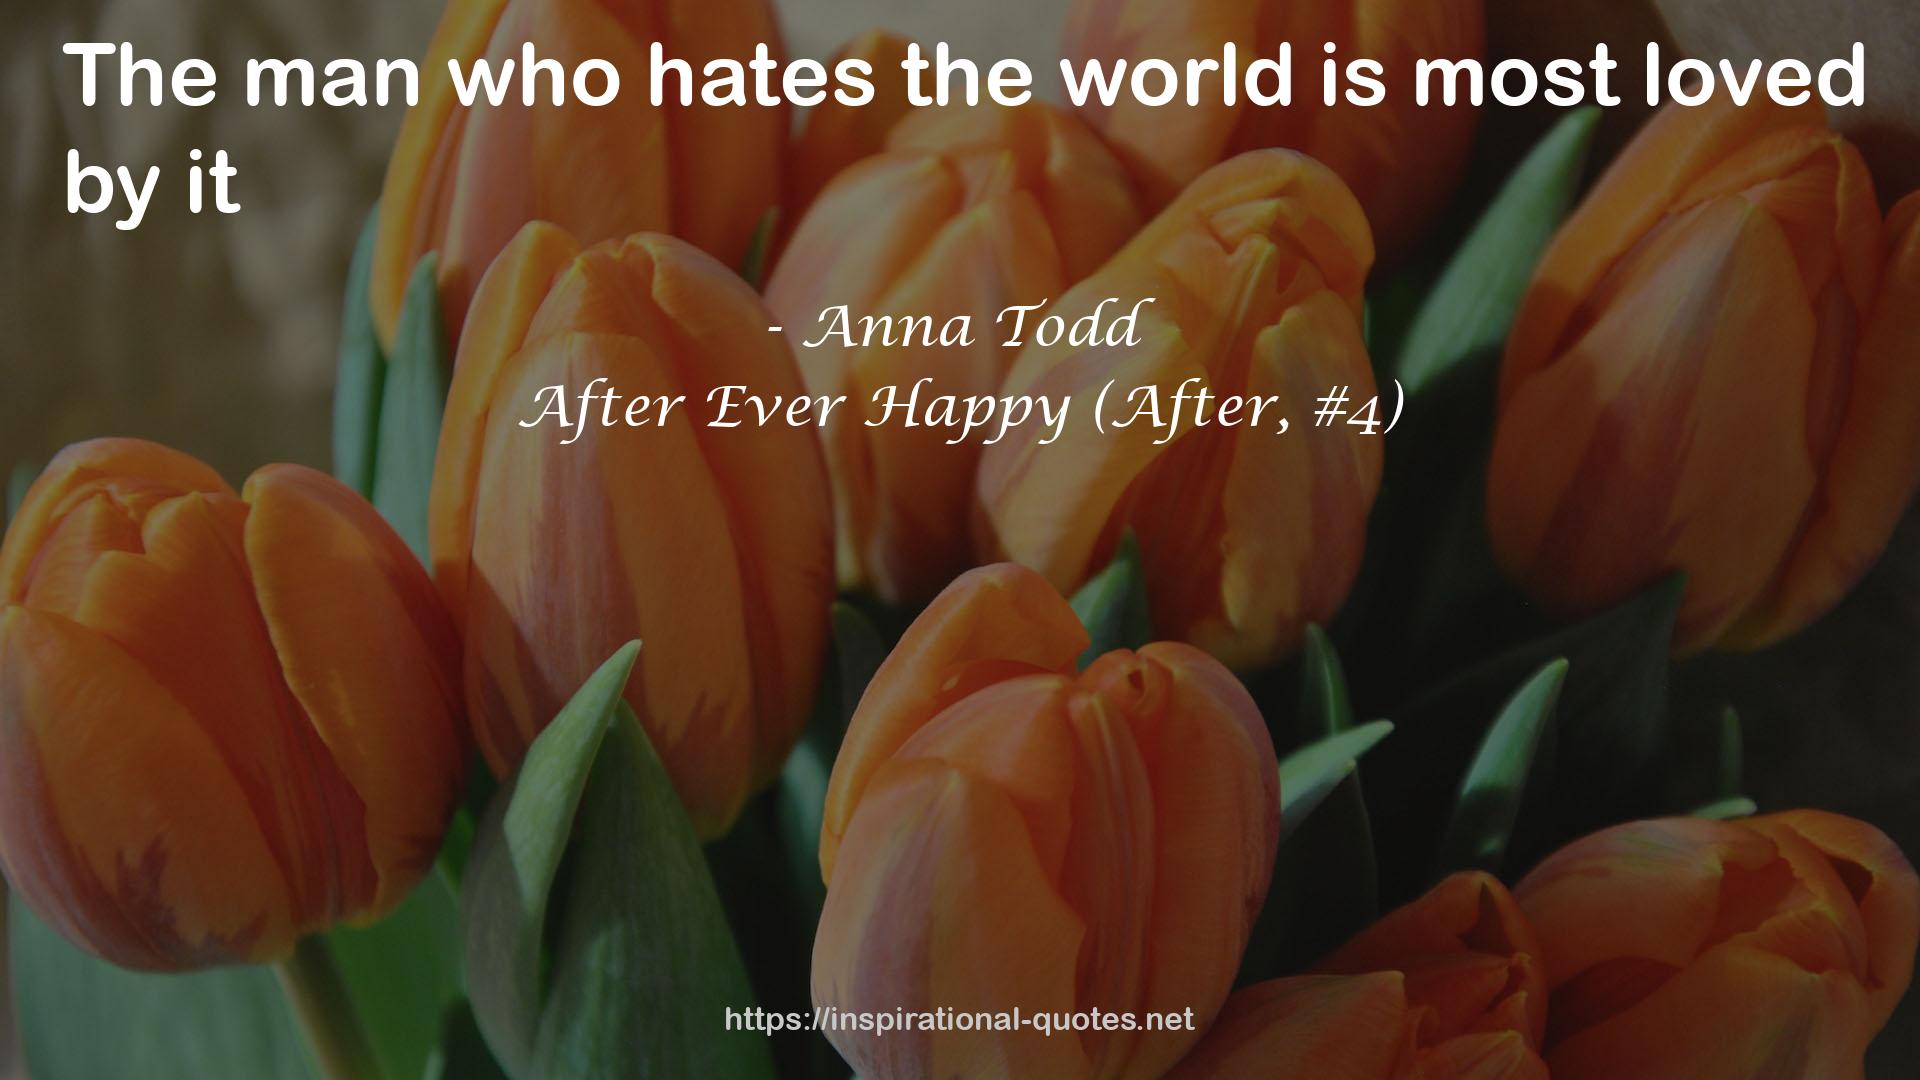 After Ever Happy (After, #4) QUOTES